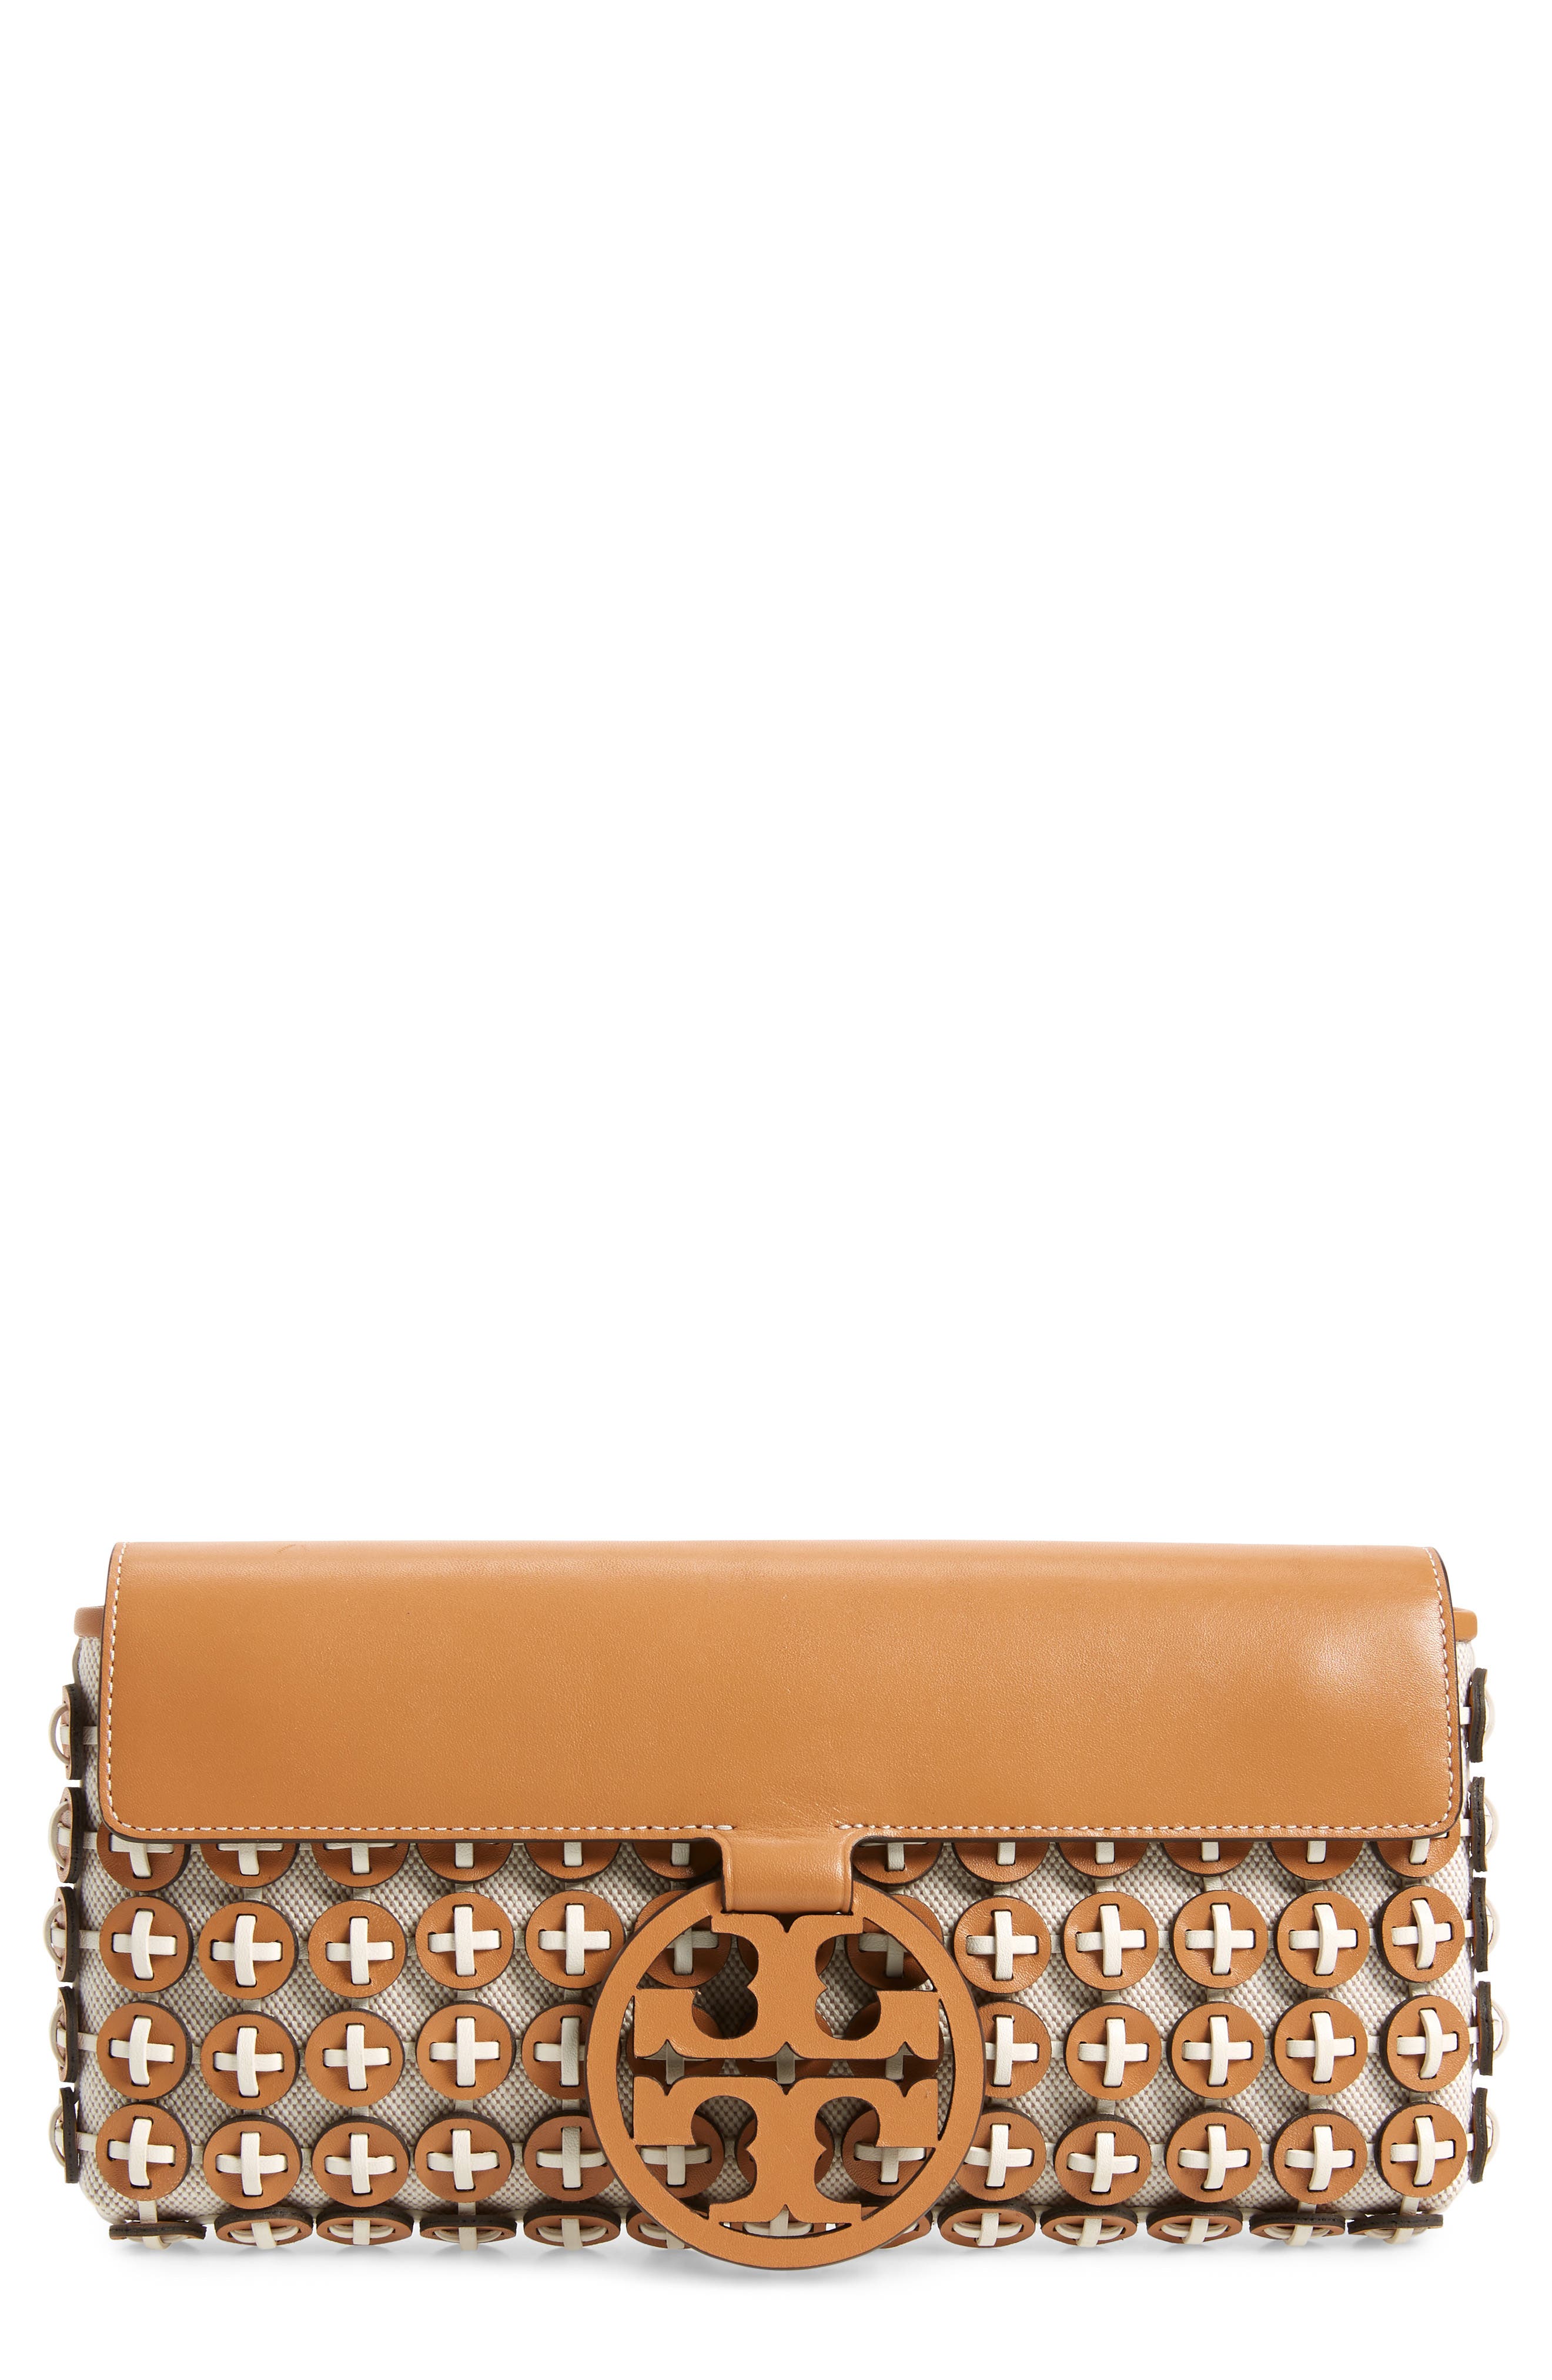 tory burch miller leather clutch